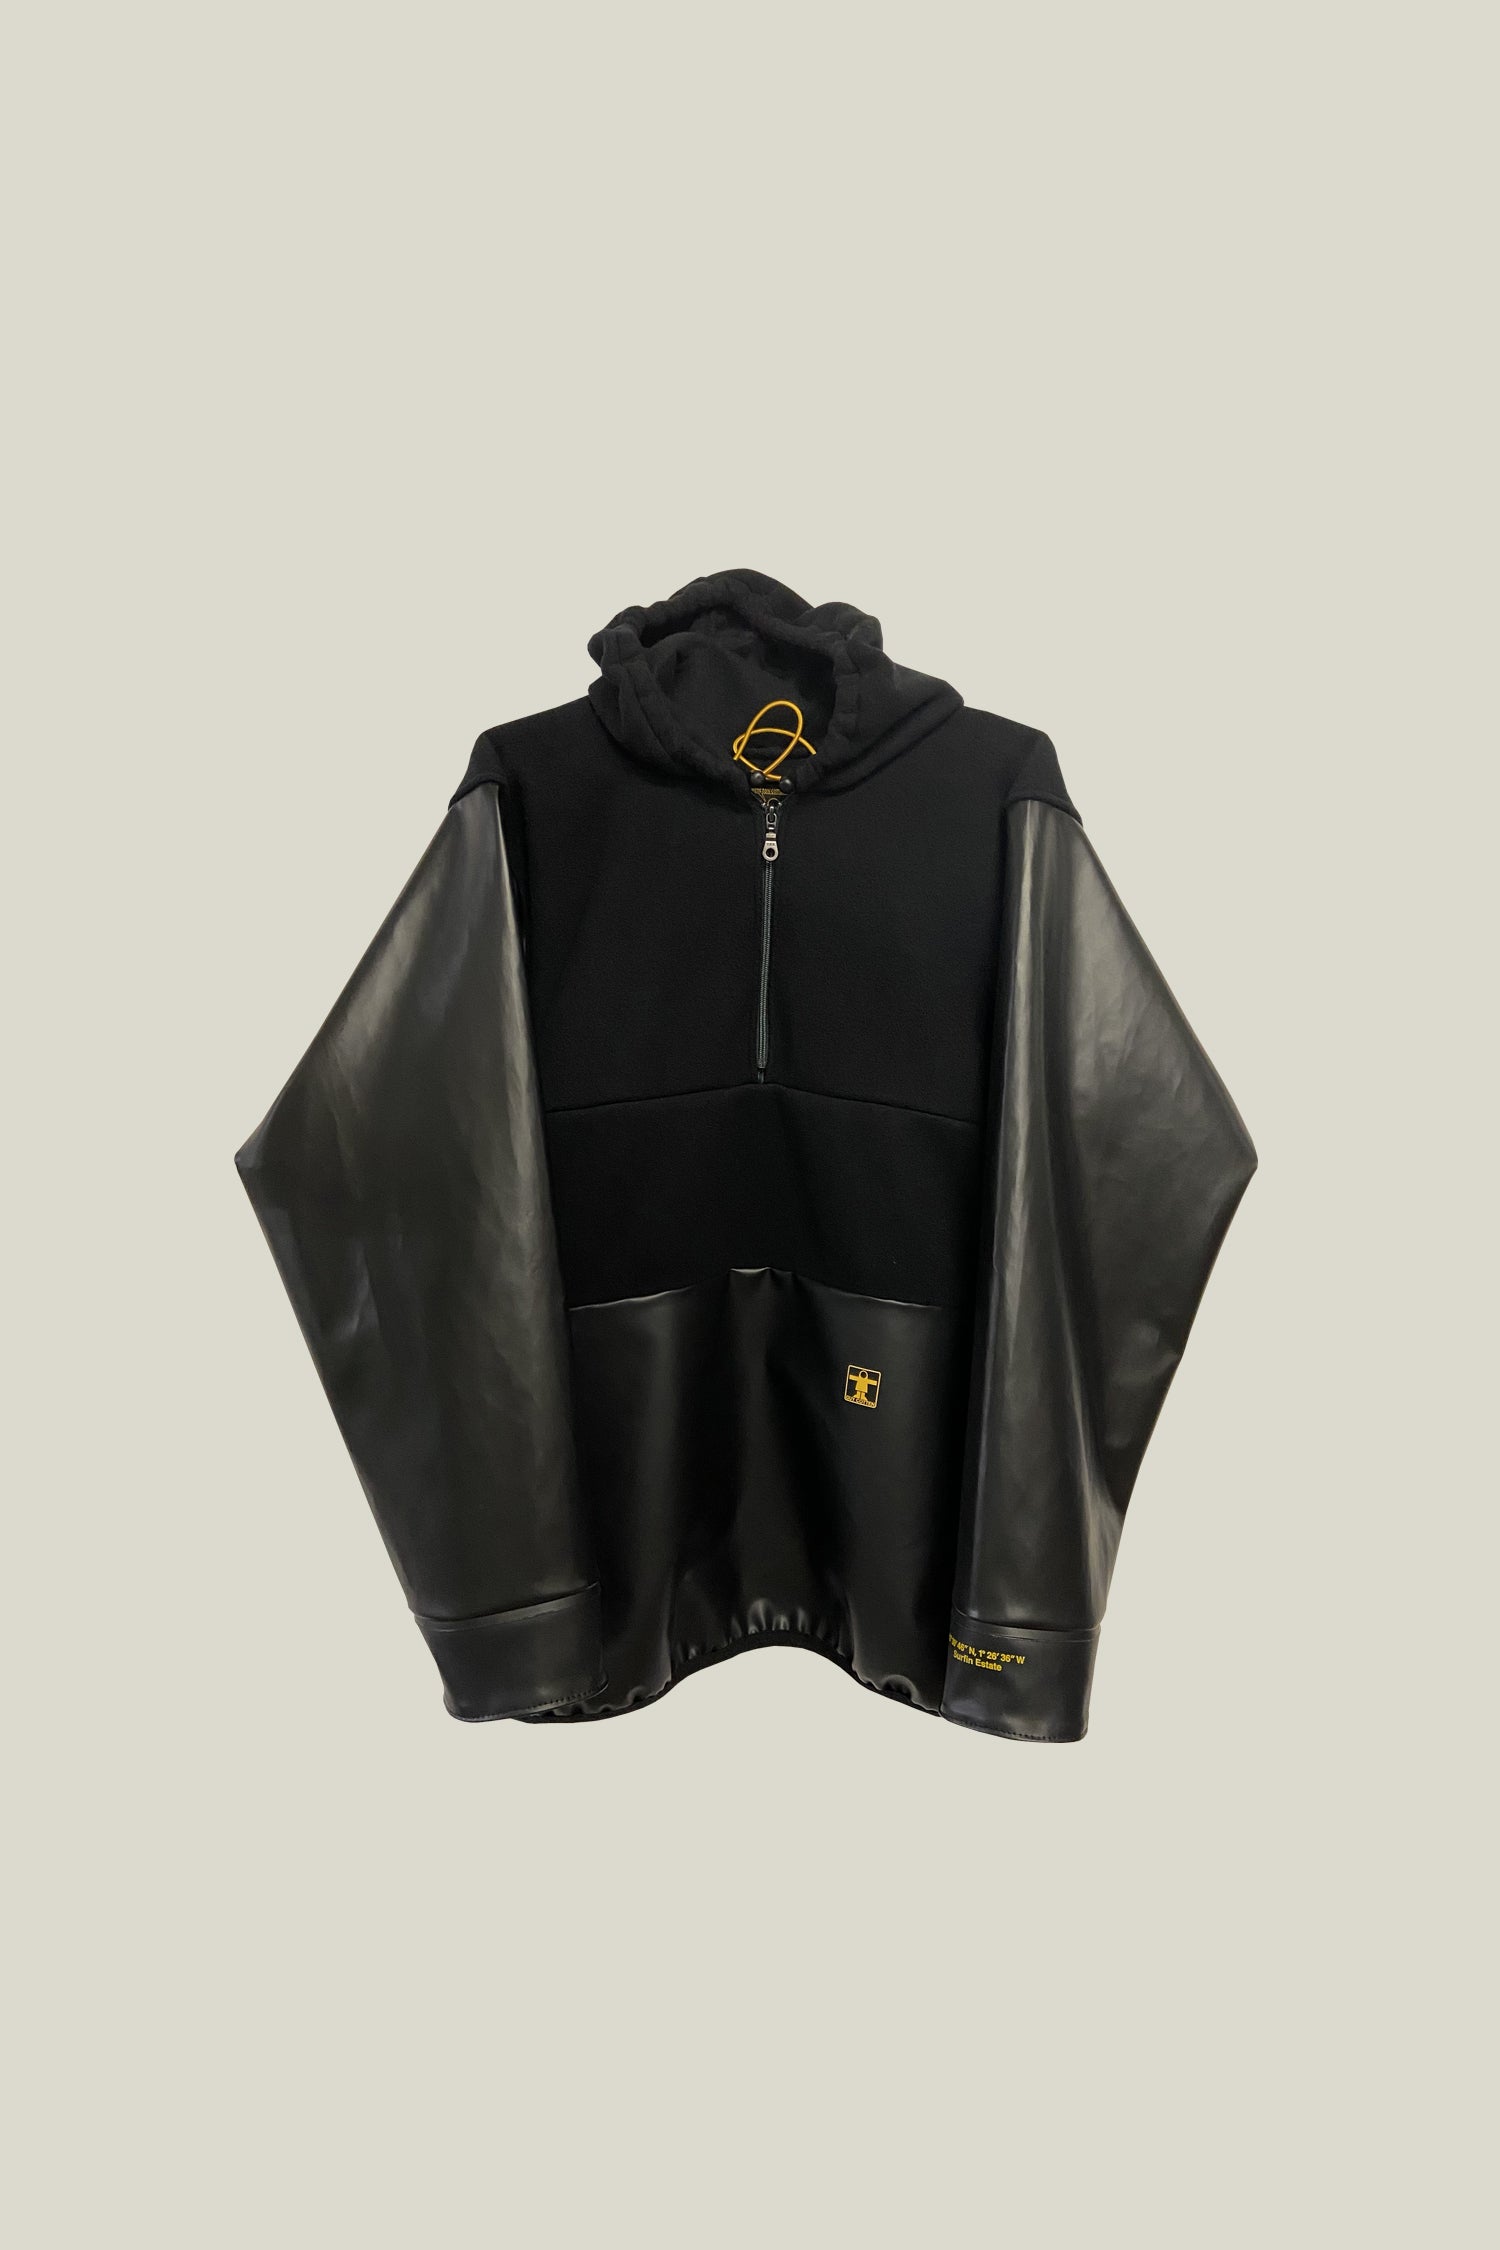 Jacket "Expedition" x Guy Cotten - Black